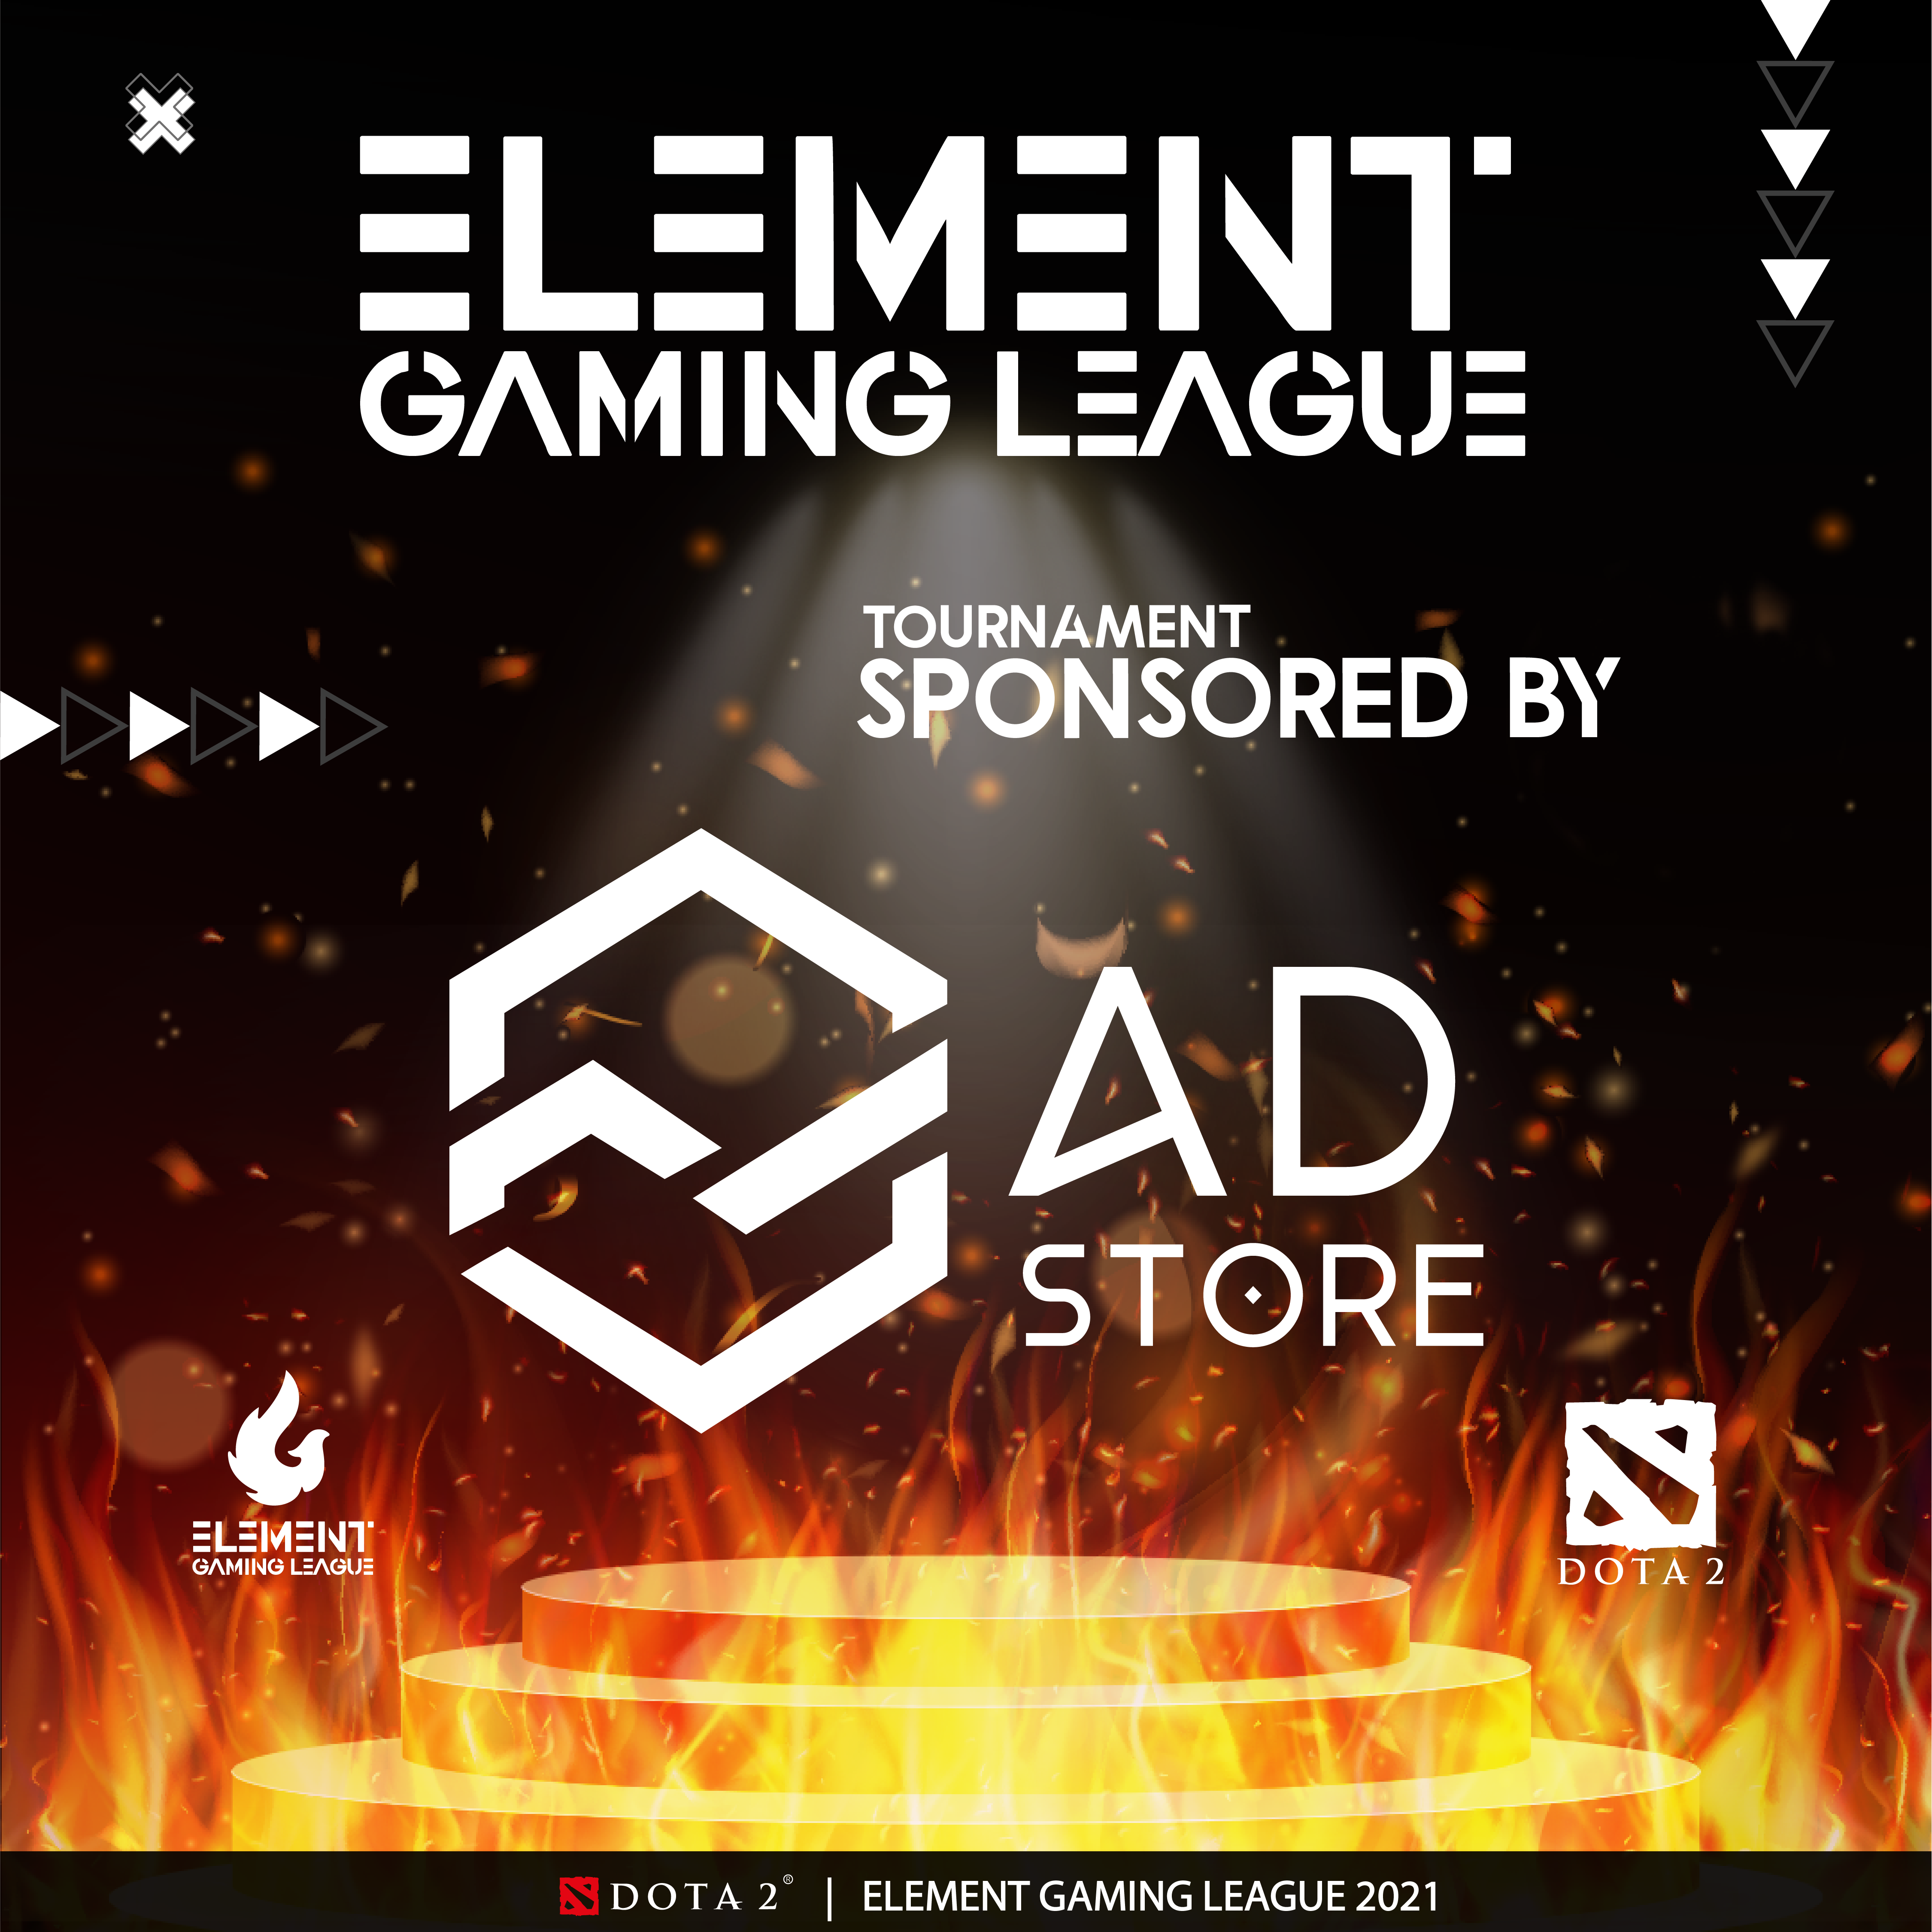 AD Store - Elemental Gaming League